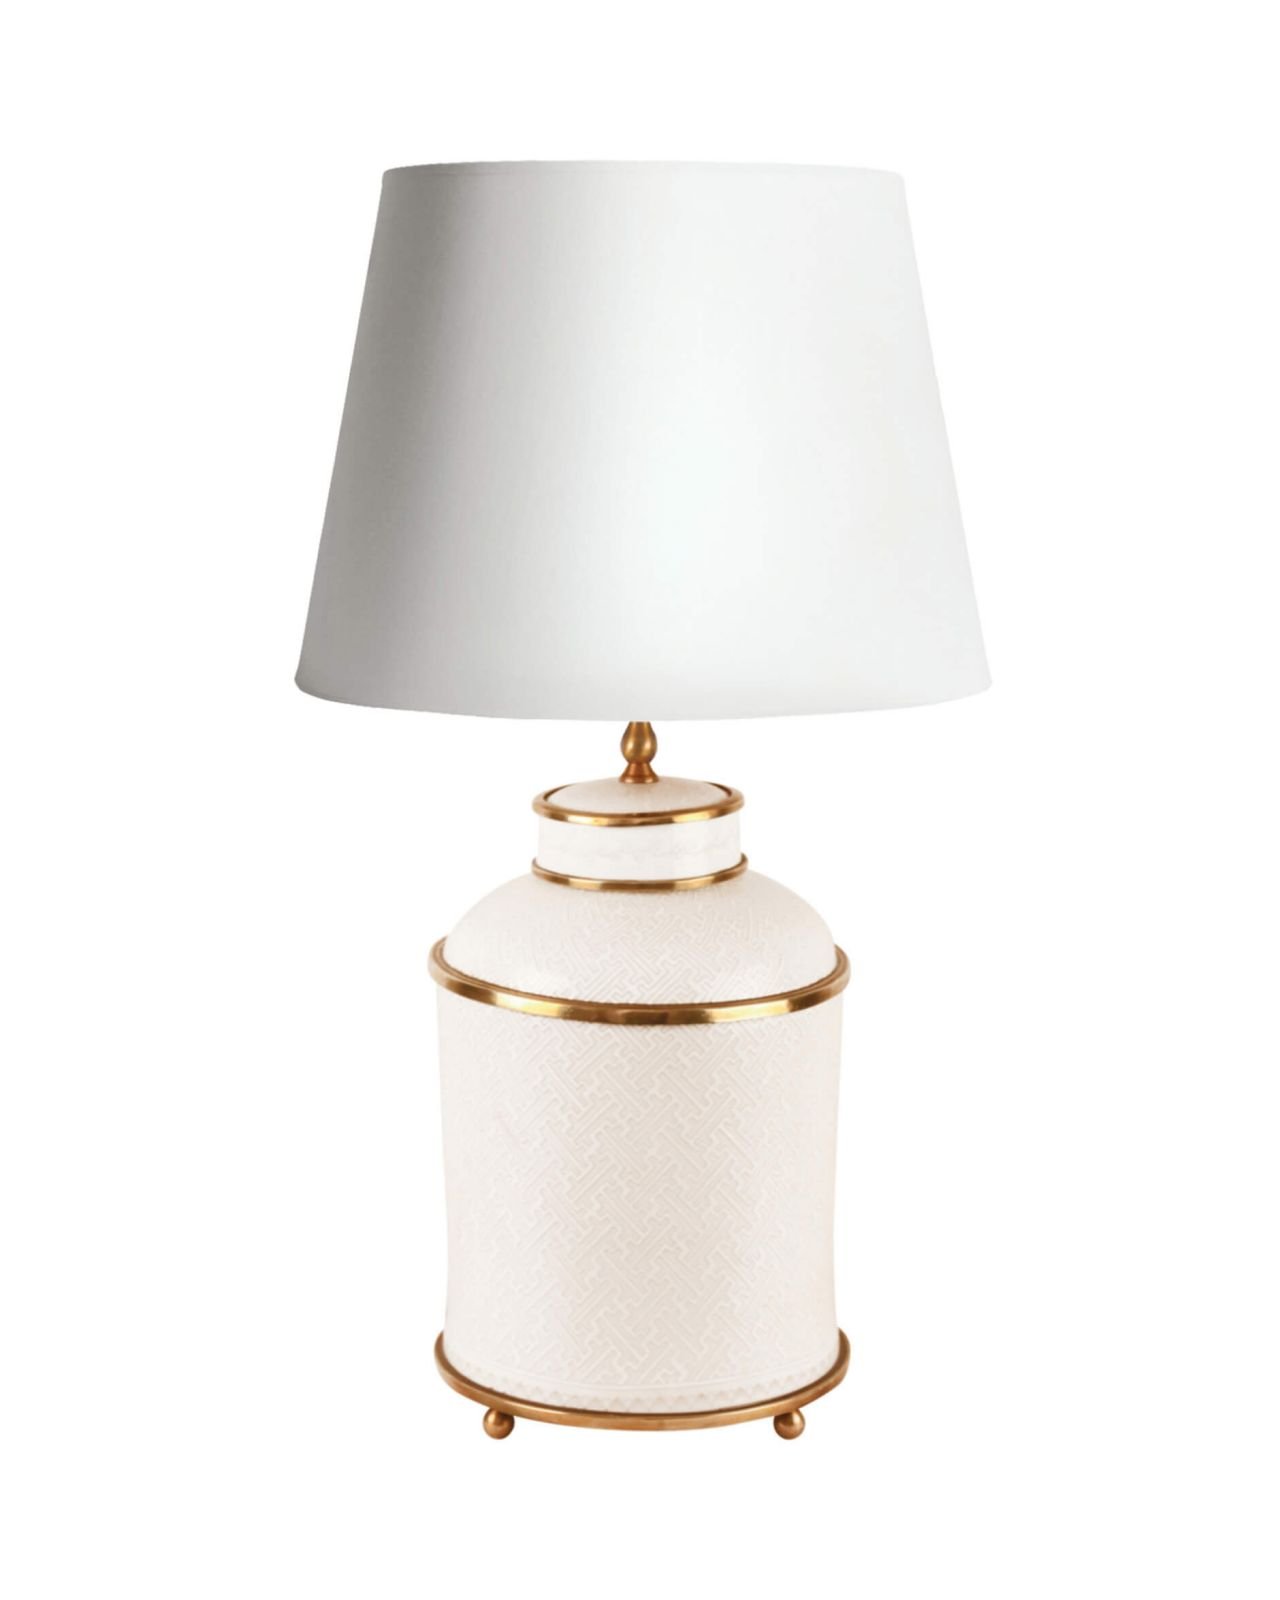 Chantal table lamp off-white